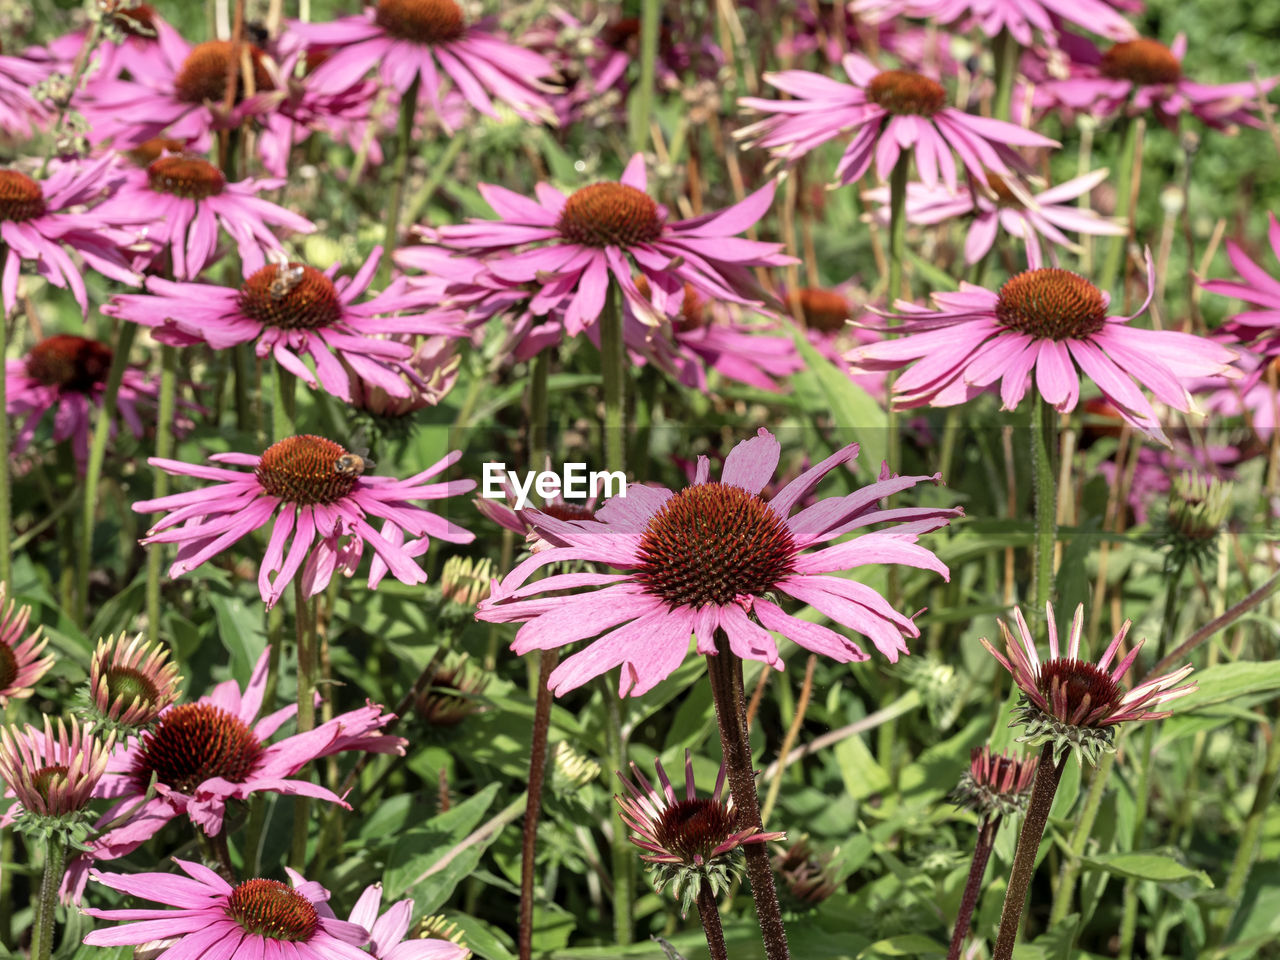 flower, flowering plant, plant, beauty in nature, freshness, fragility, growth, petal, flower head, inflorescence, pink, close-up, nature, no people, day, pollen, focus on foreground, outdoors, wildflower, botany, high angle view, purple, field, bee balm, land, green